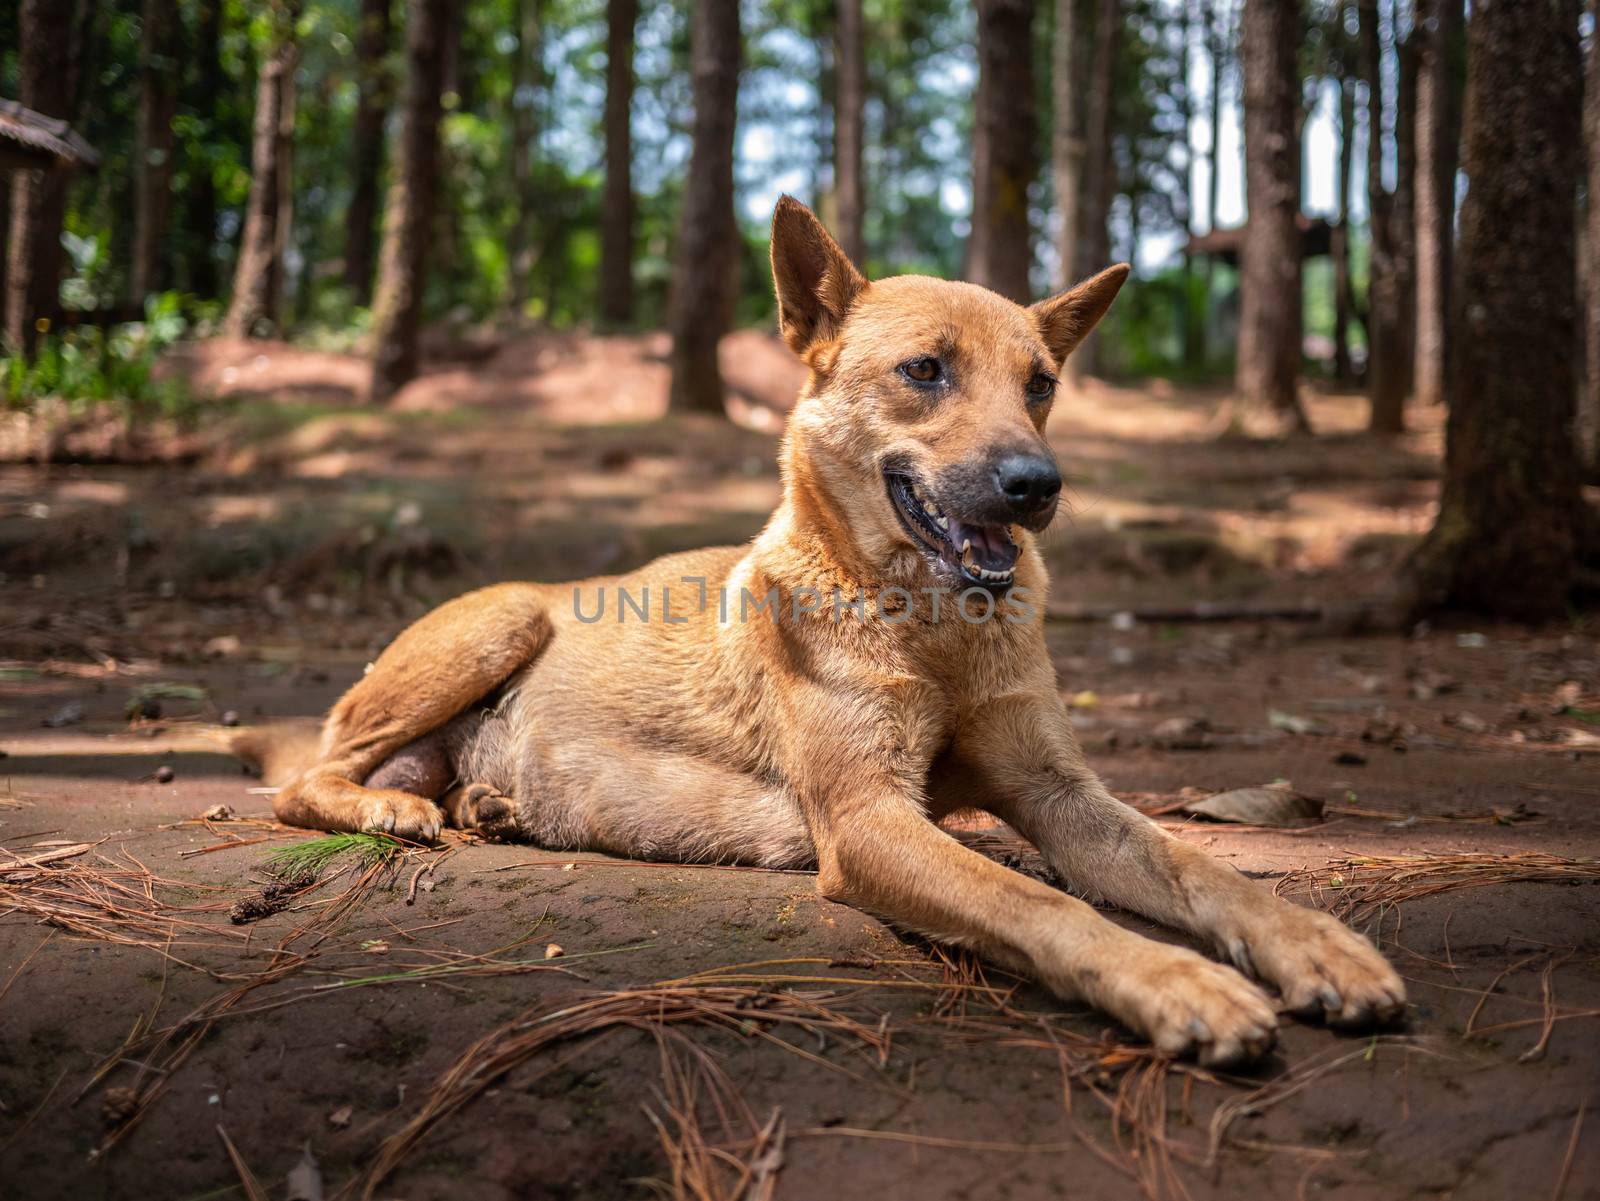 Brown short-haired dog lying on ground at a camping spot in a pine forest.